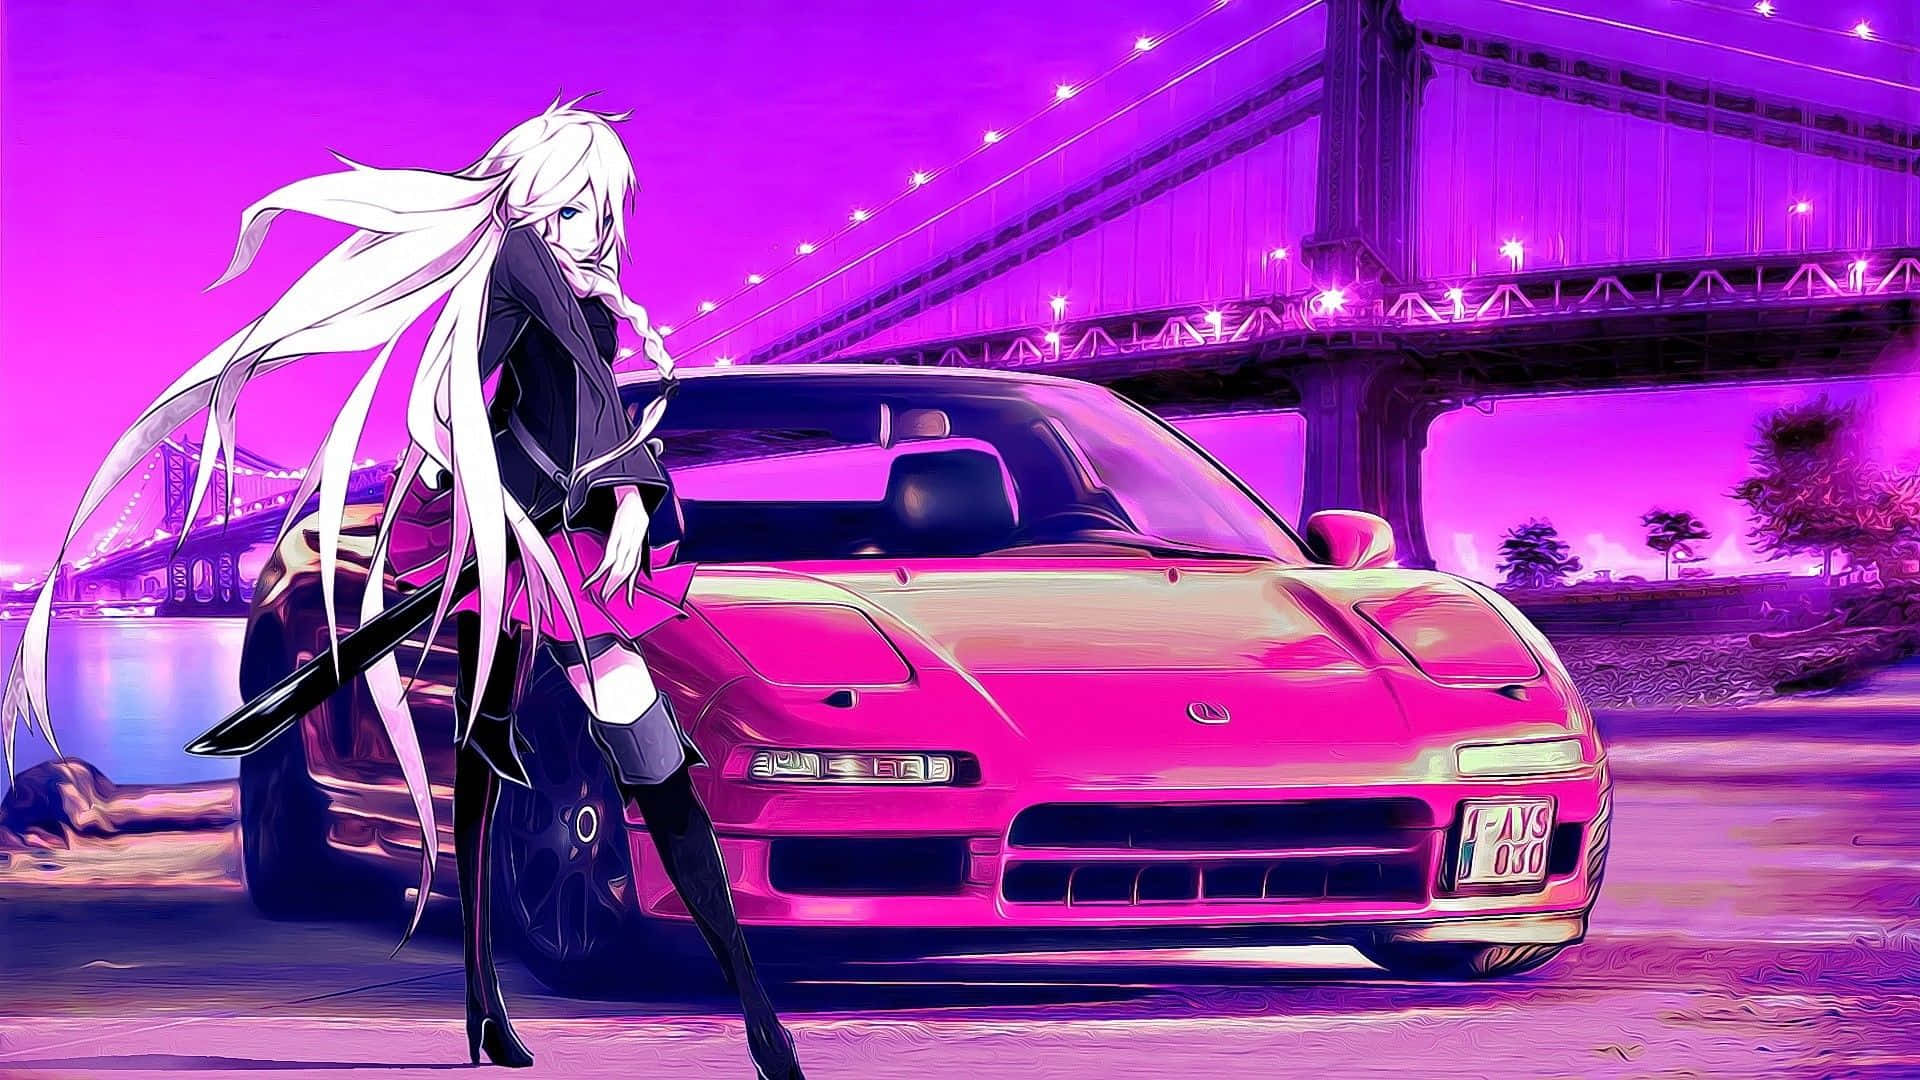 Let your imagination race as you drive past in this anime car.